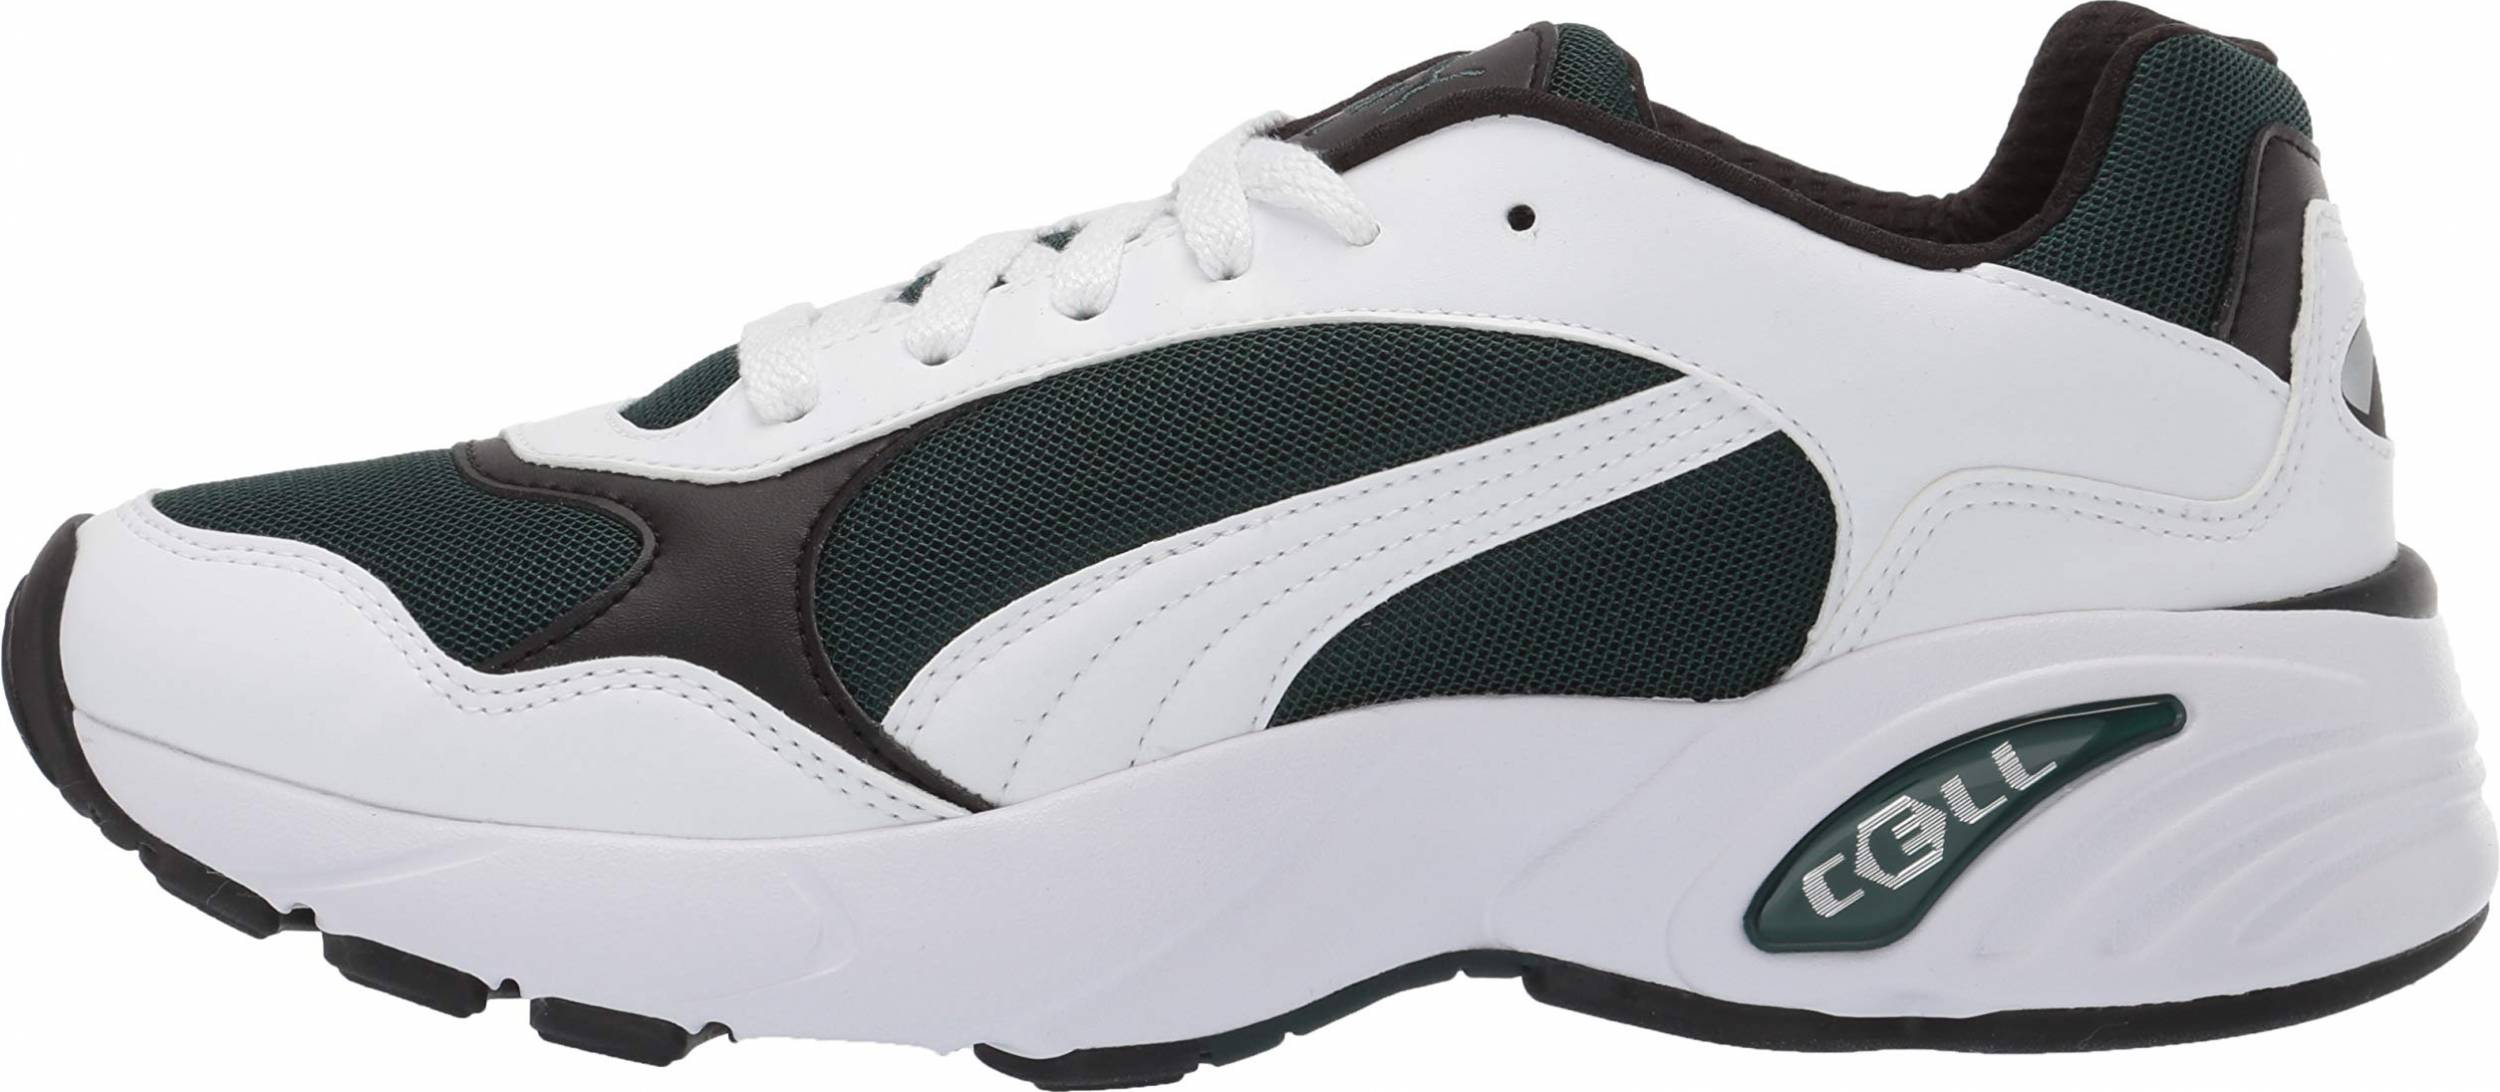 Puma CELL Viper in colors (only $35) SbriShops